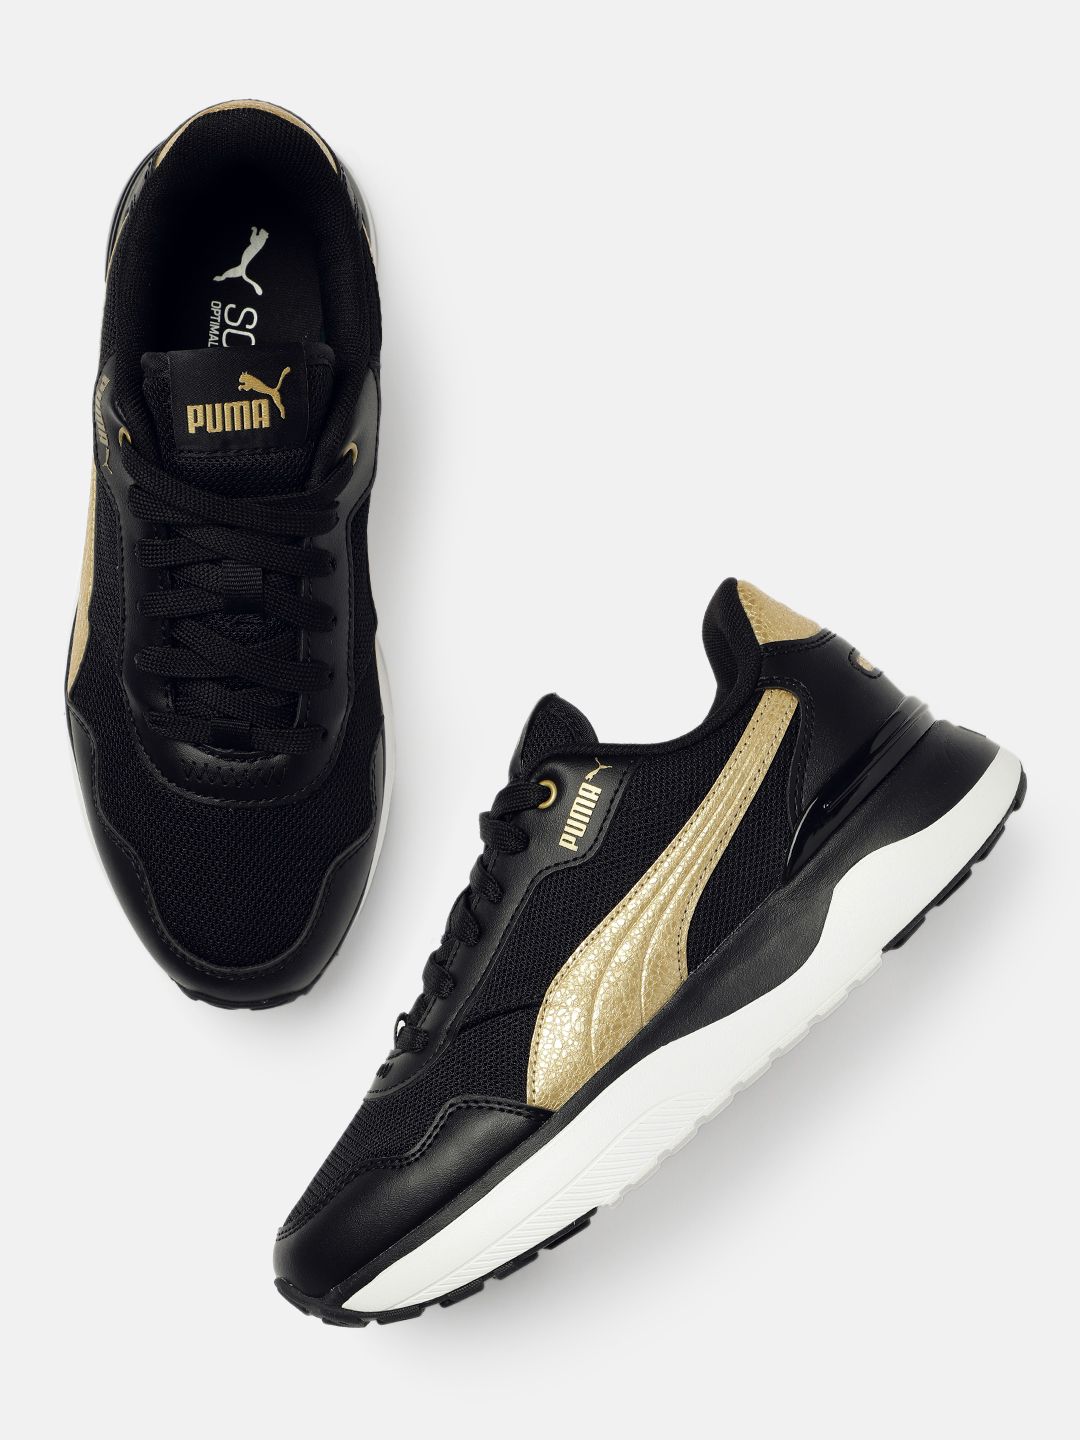 Puma Women Black & Gold-Toned Colourblocked R78 Voyage Distressed Sneakers Price in India